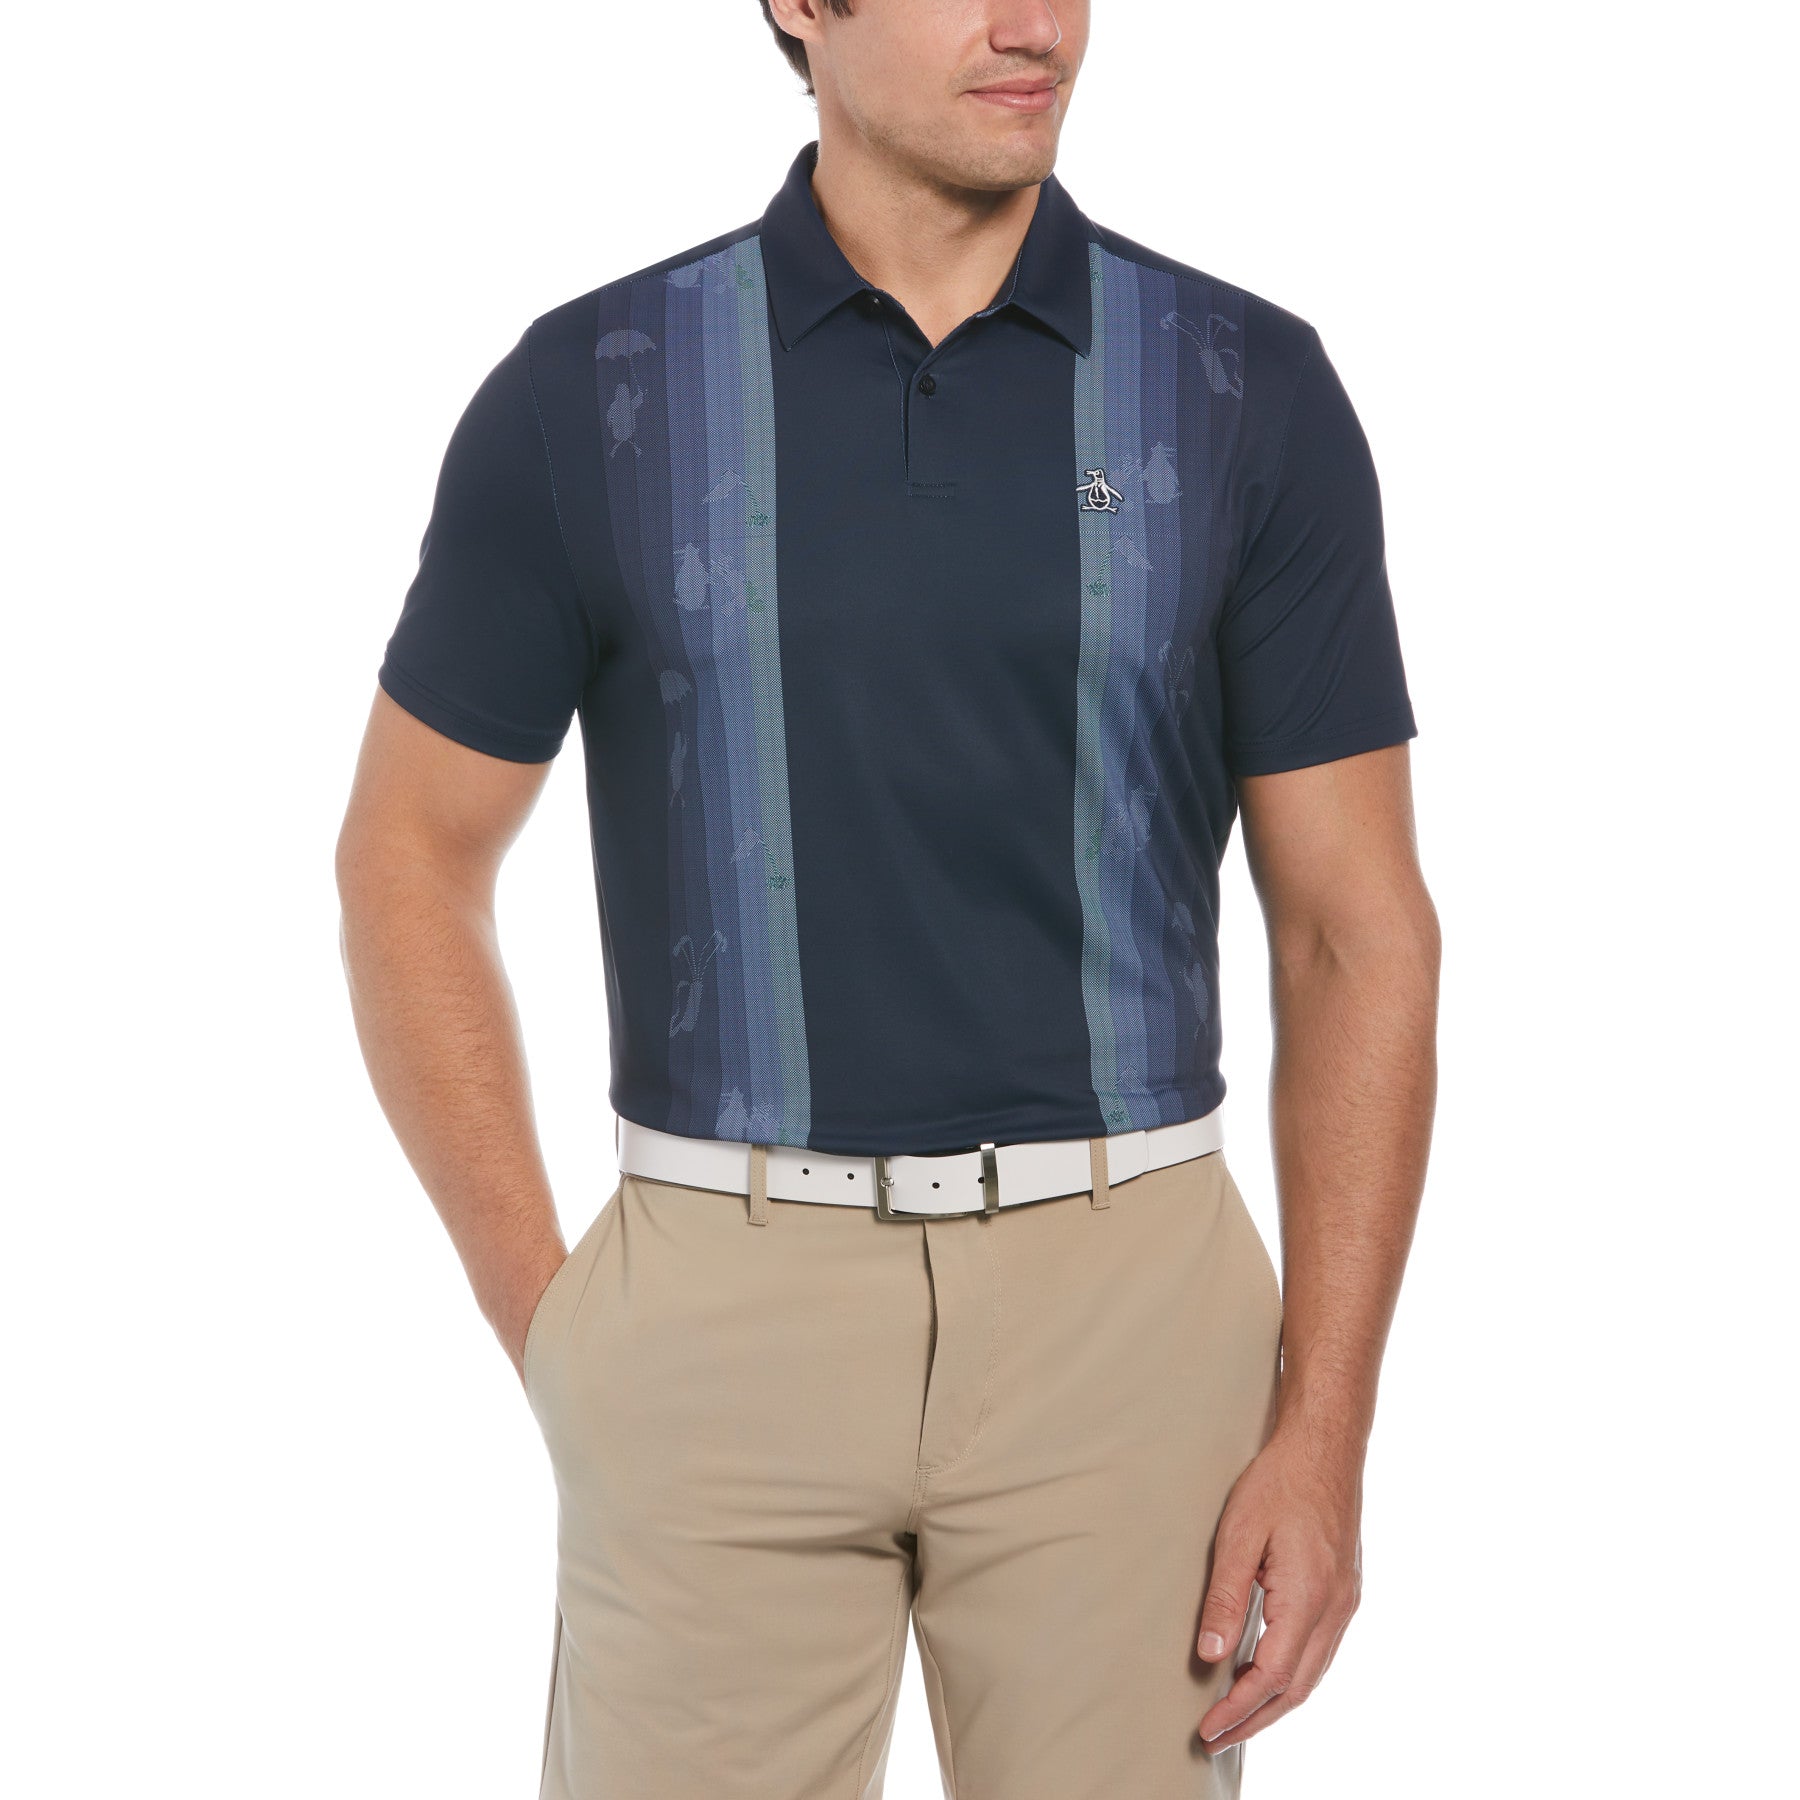 View Pete Vertical Color Block Print Short Sleeve Golf Polo Shirt In Black information